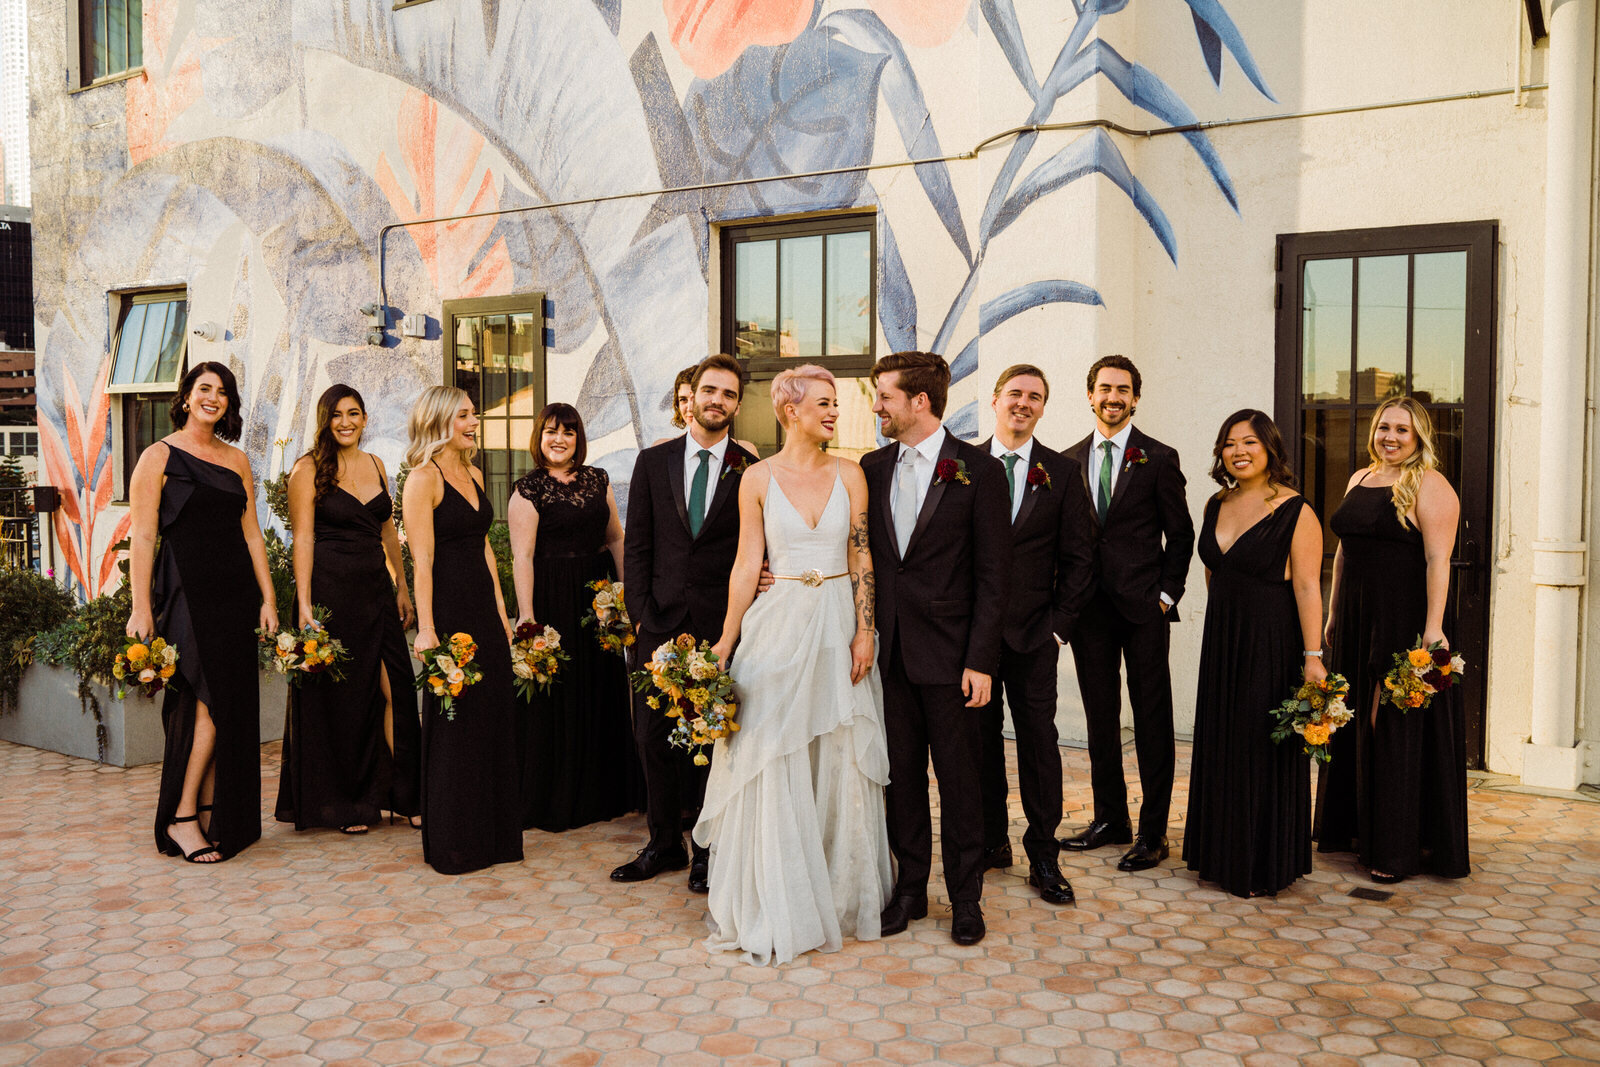 Playful, fun, candid photos of co-ed bridal party at Hotel Figuera in Los Angeles